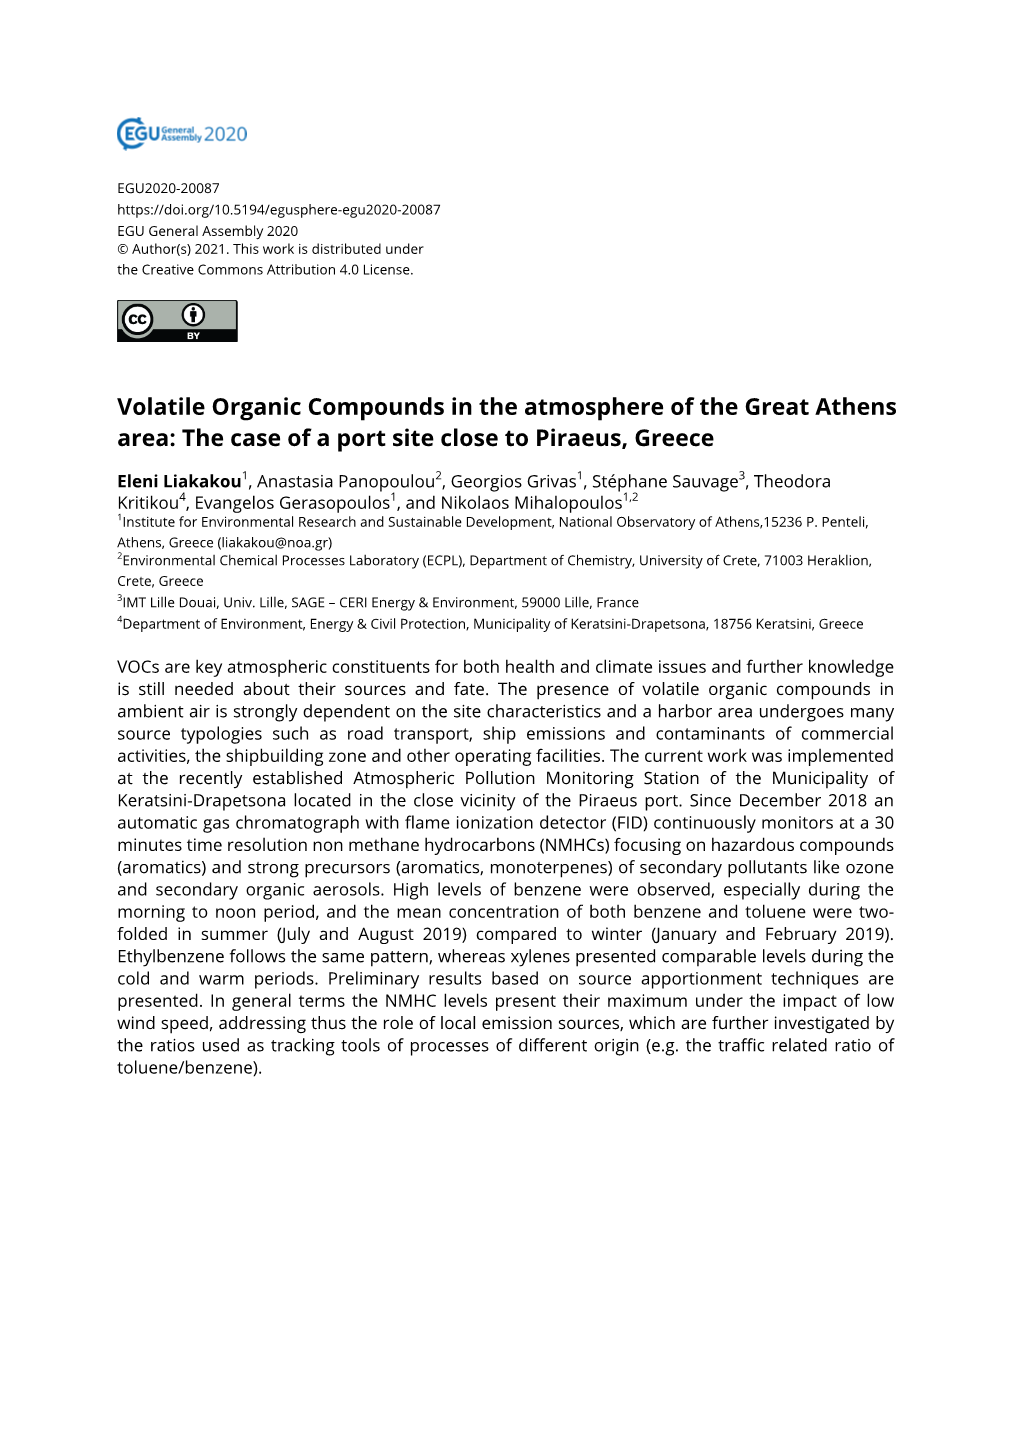 Volatile Organic Compounds in the Atmosphere of the Great Athens Area: the Case of a Port Site Close to Piraeus, Greece